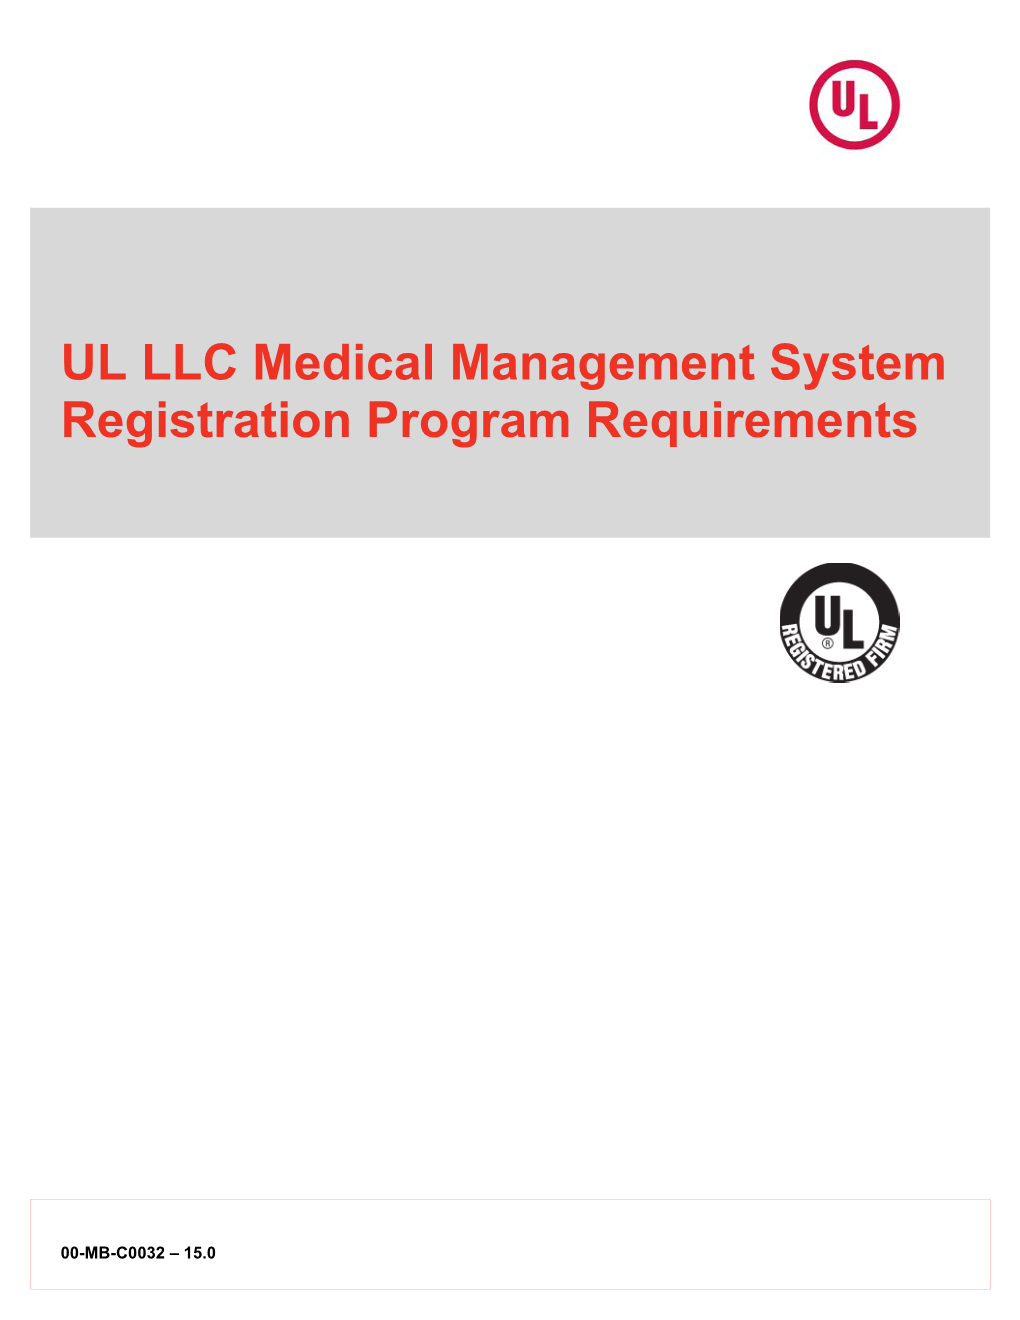 Medical Management Systems Council, Shall Chair the Appeals Panel